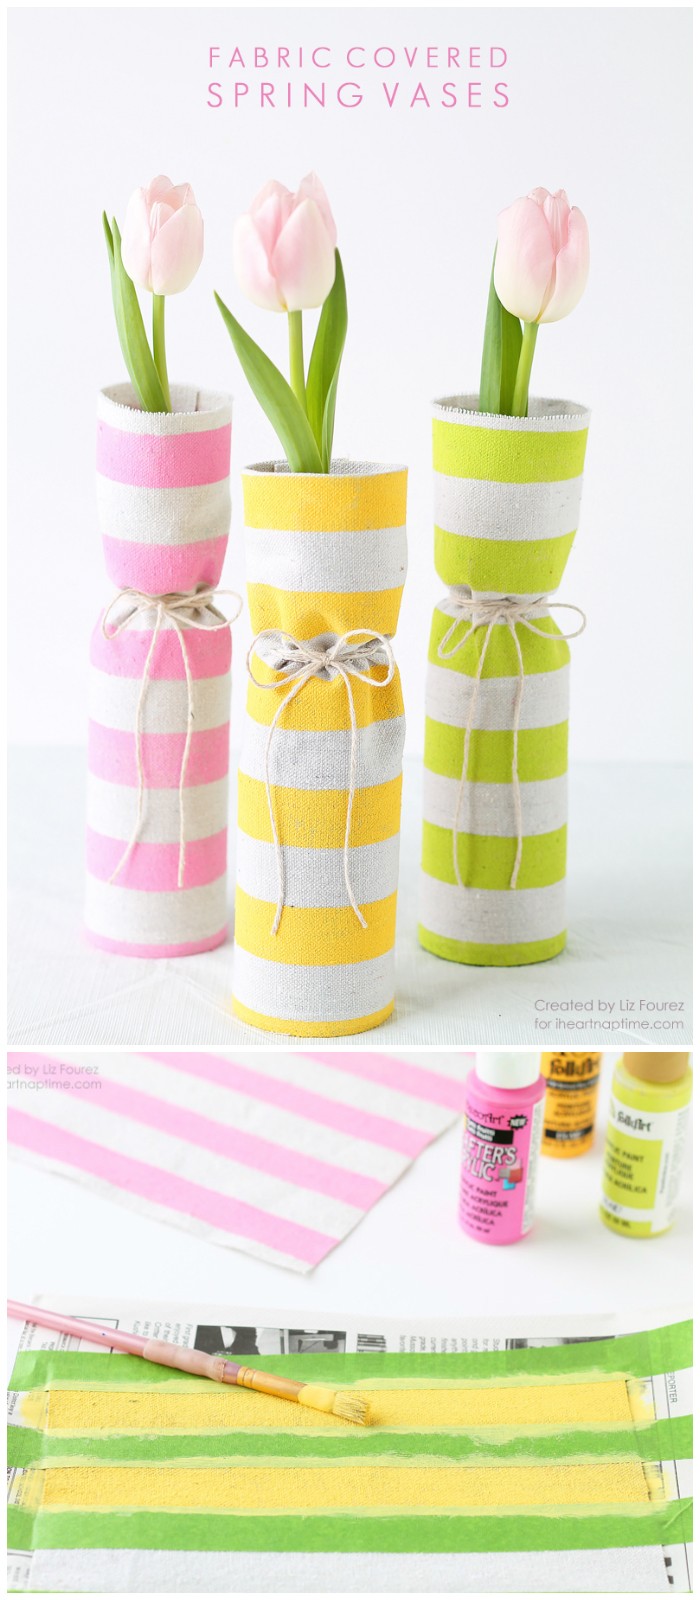 Fabric Covered Spring Vases